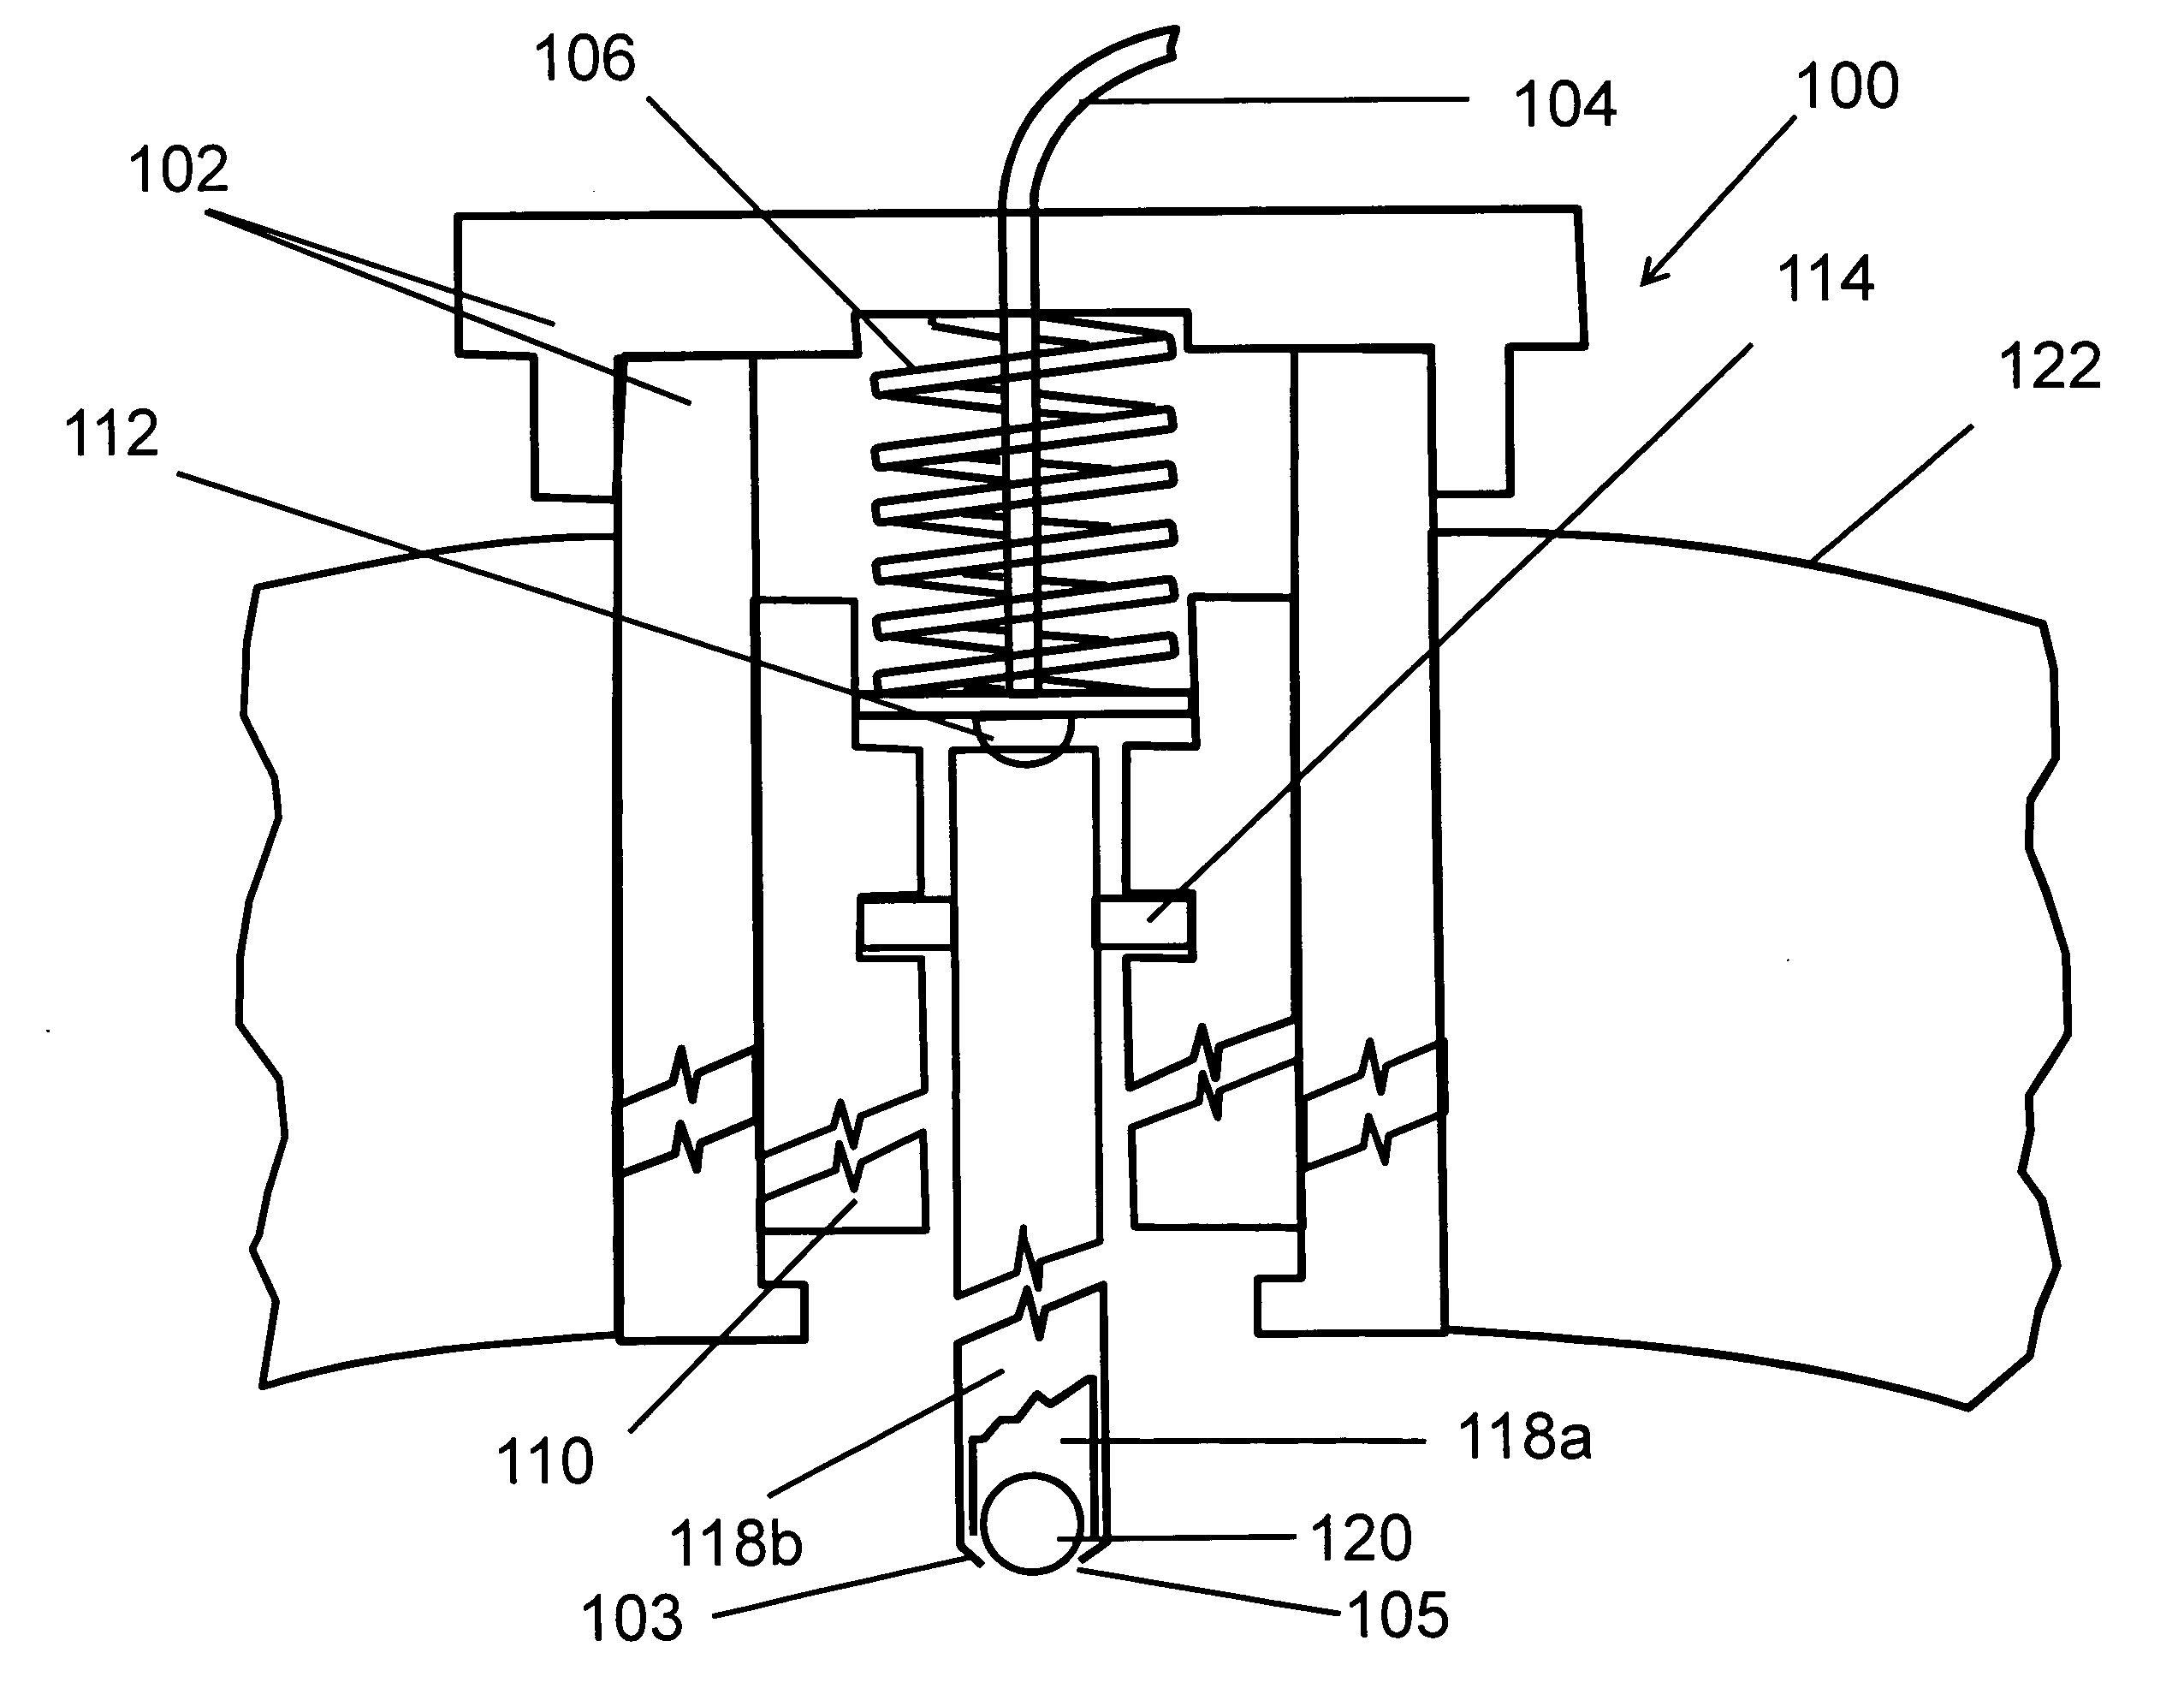 Mobile electroencephalograph data collection and diagnosis system